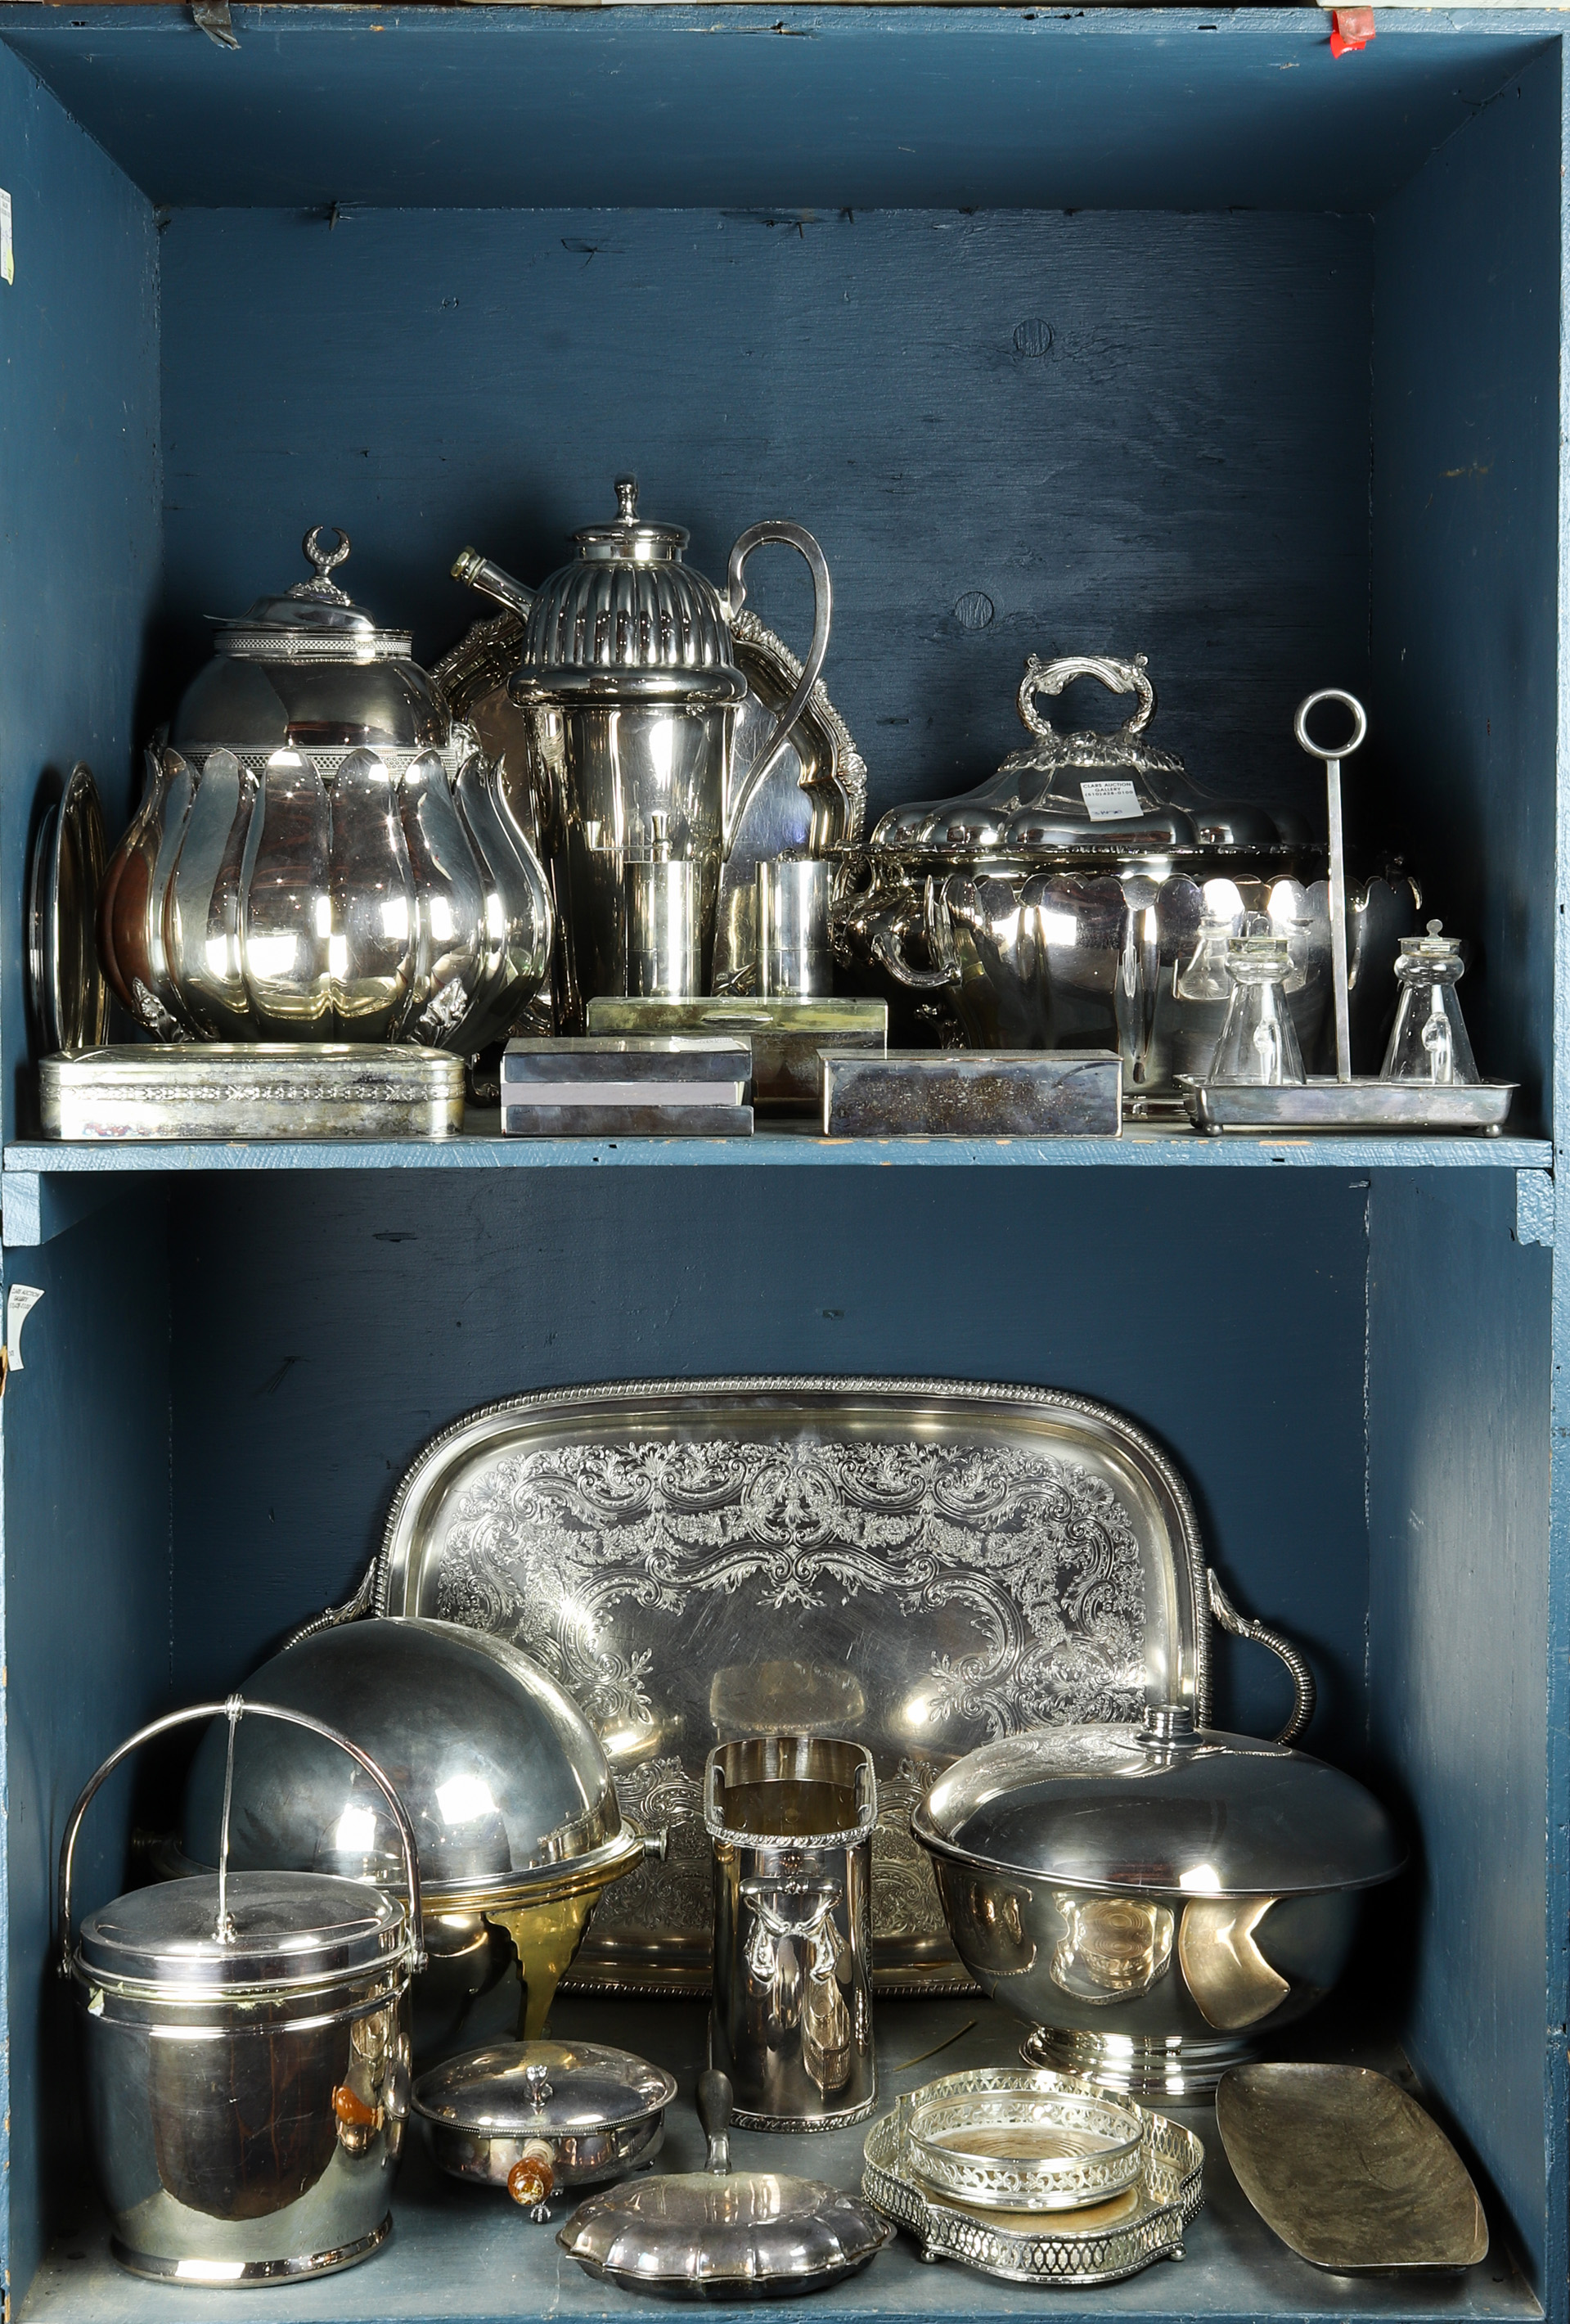 TWO SHELVES OF ASSOCIATED SILVER 3a4a34